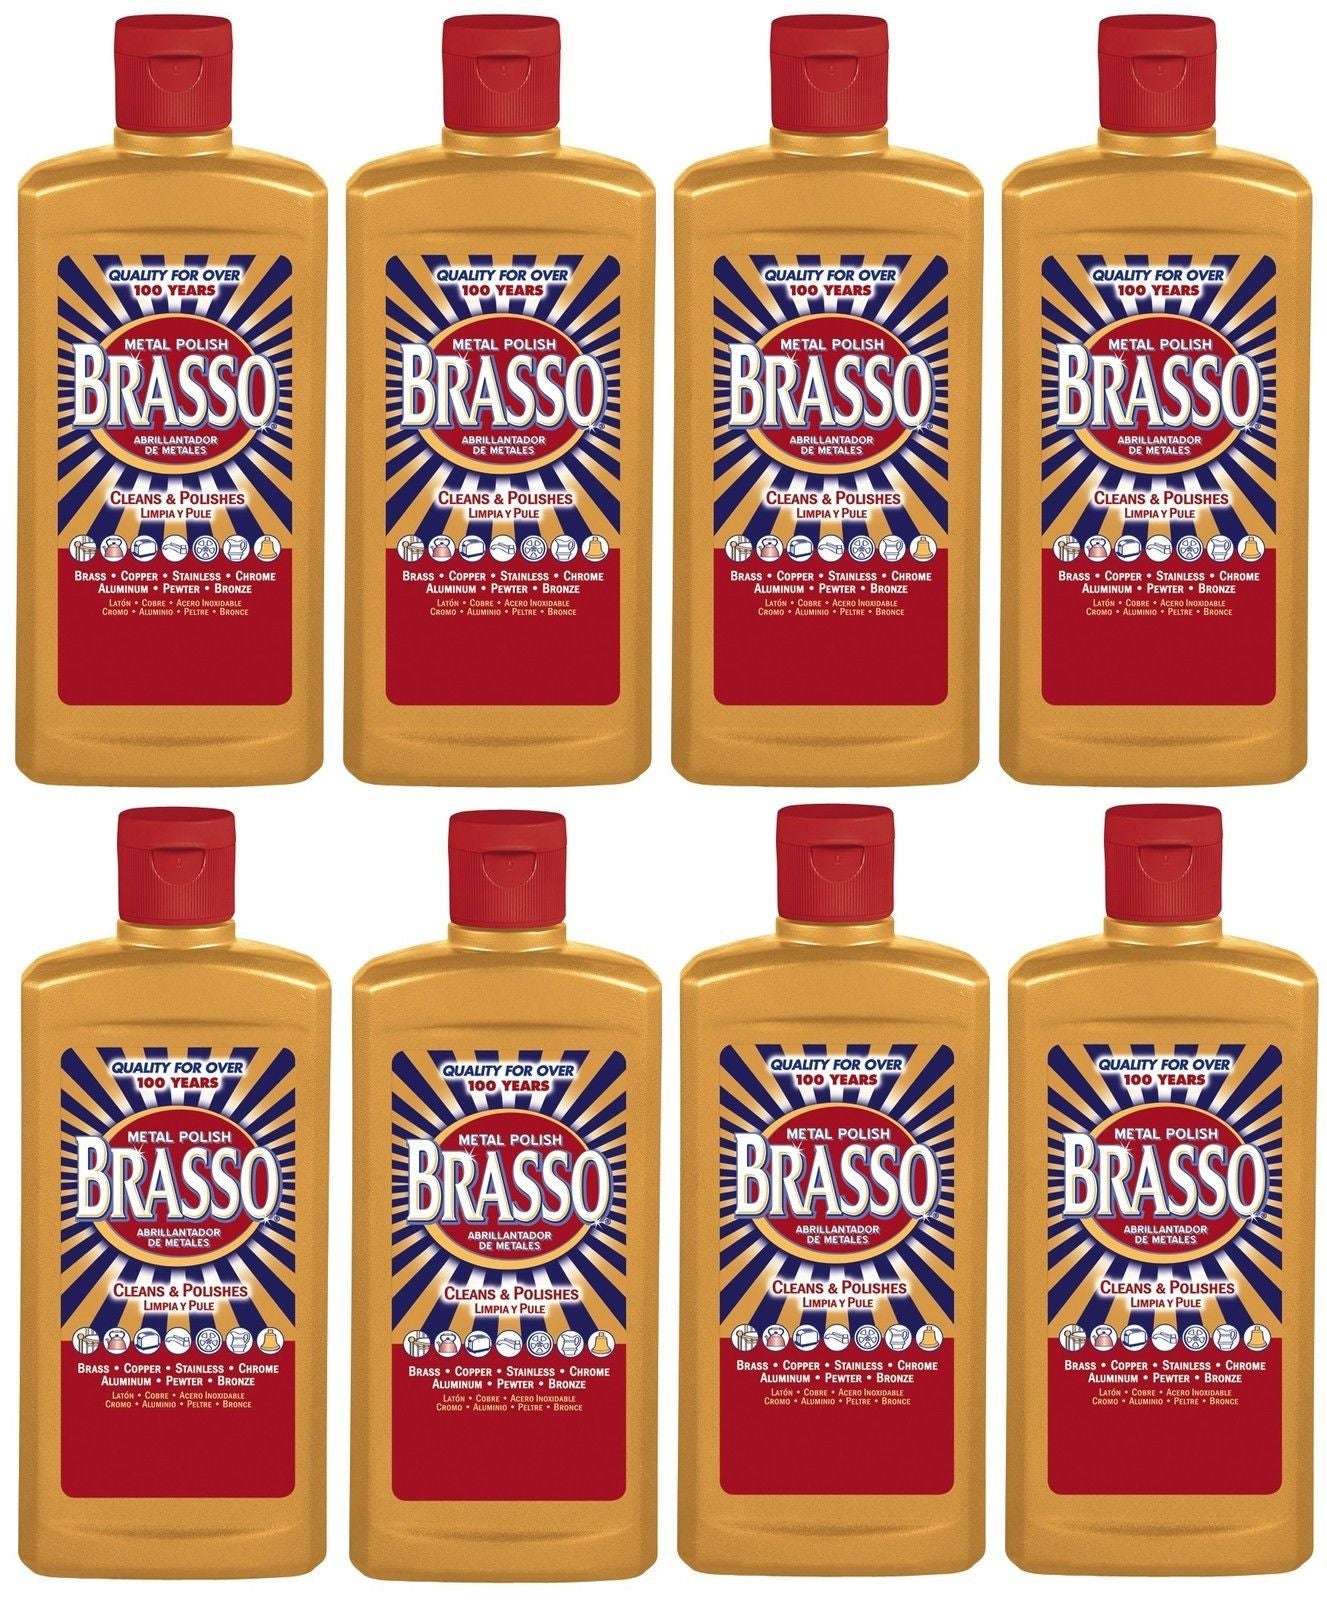 Brasso Metal Polish For brass, copper, stainless steel and chrome